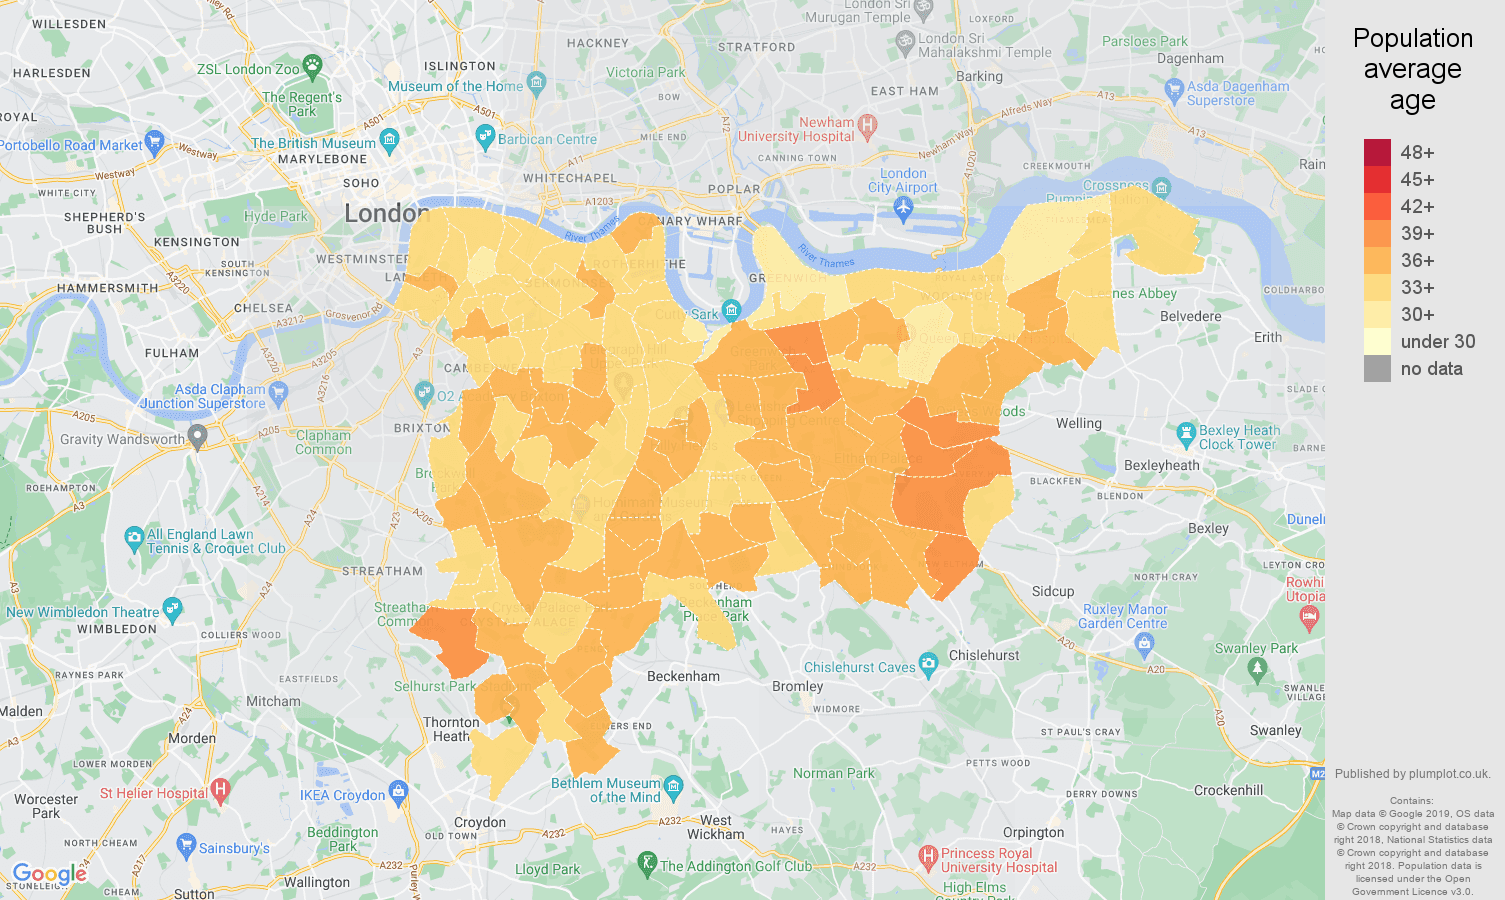 South East London population average age map